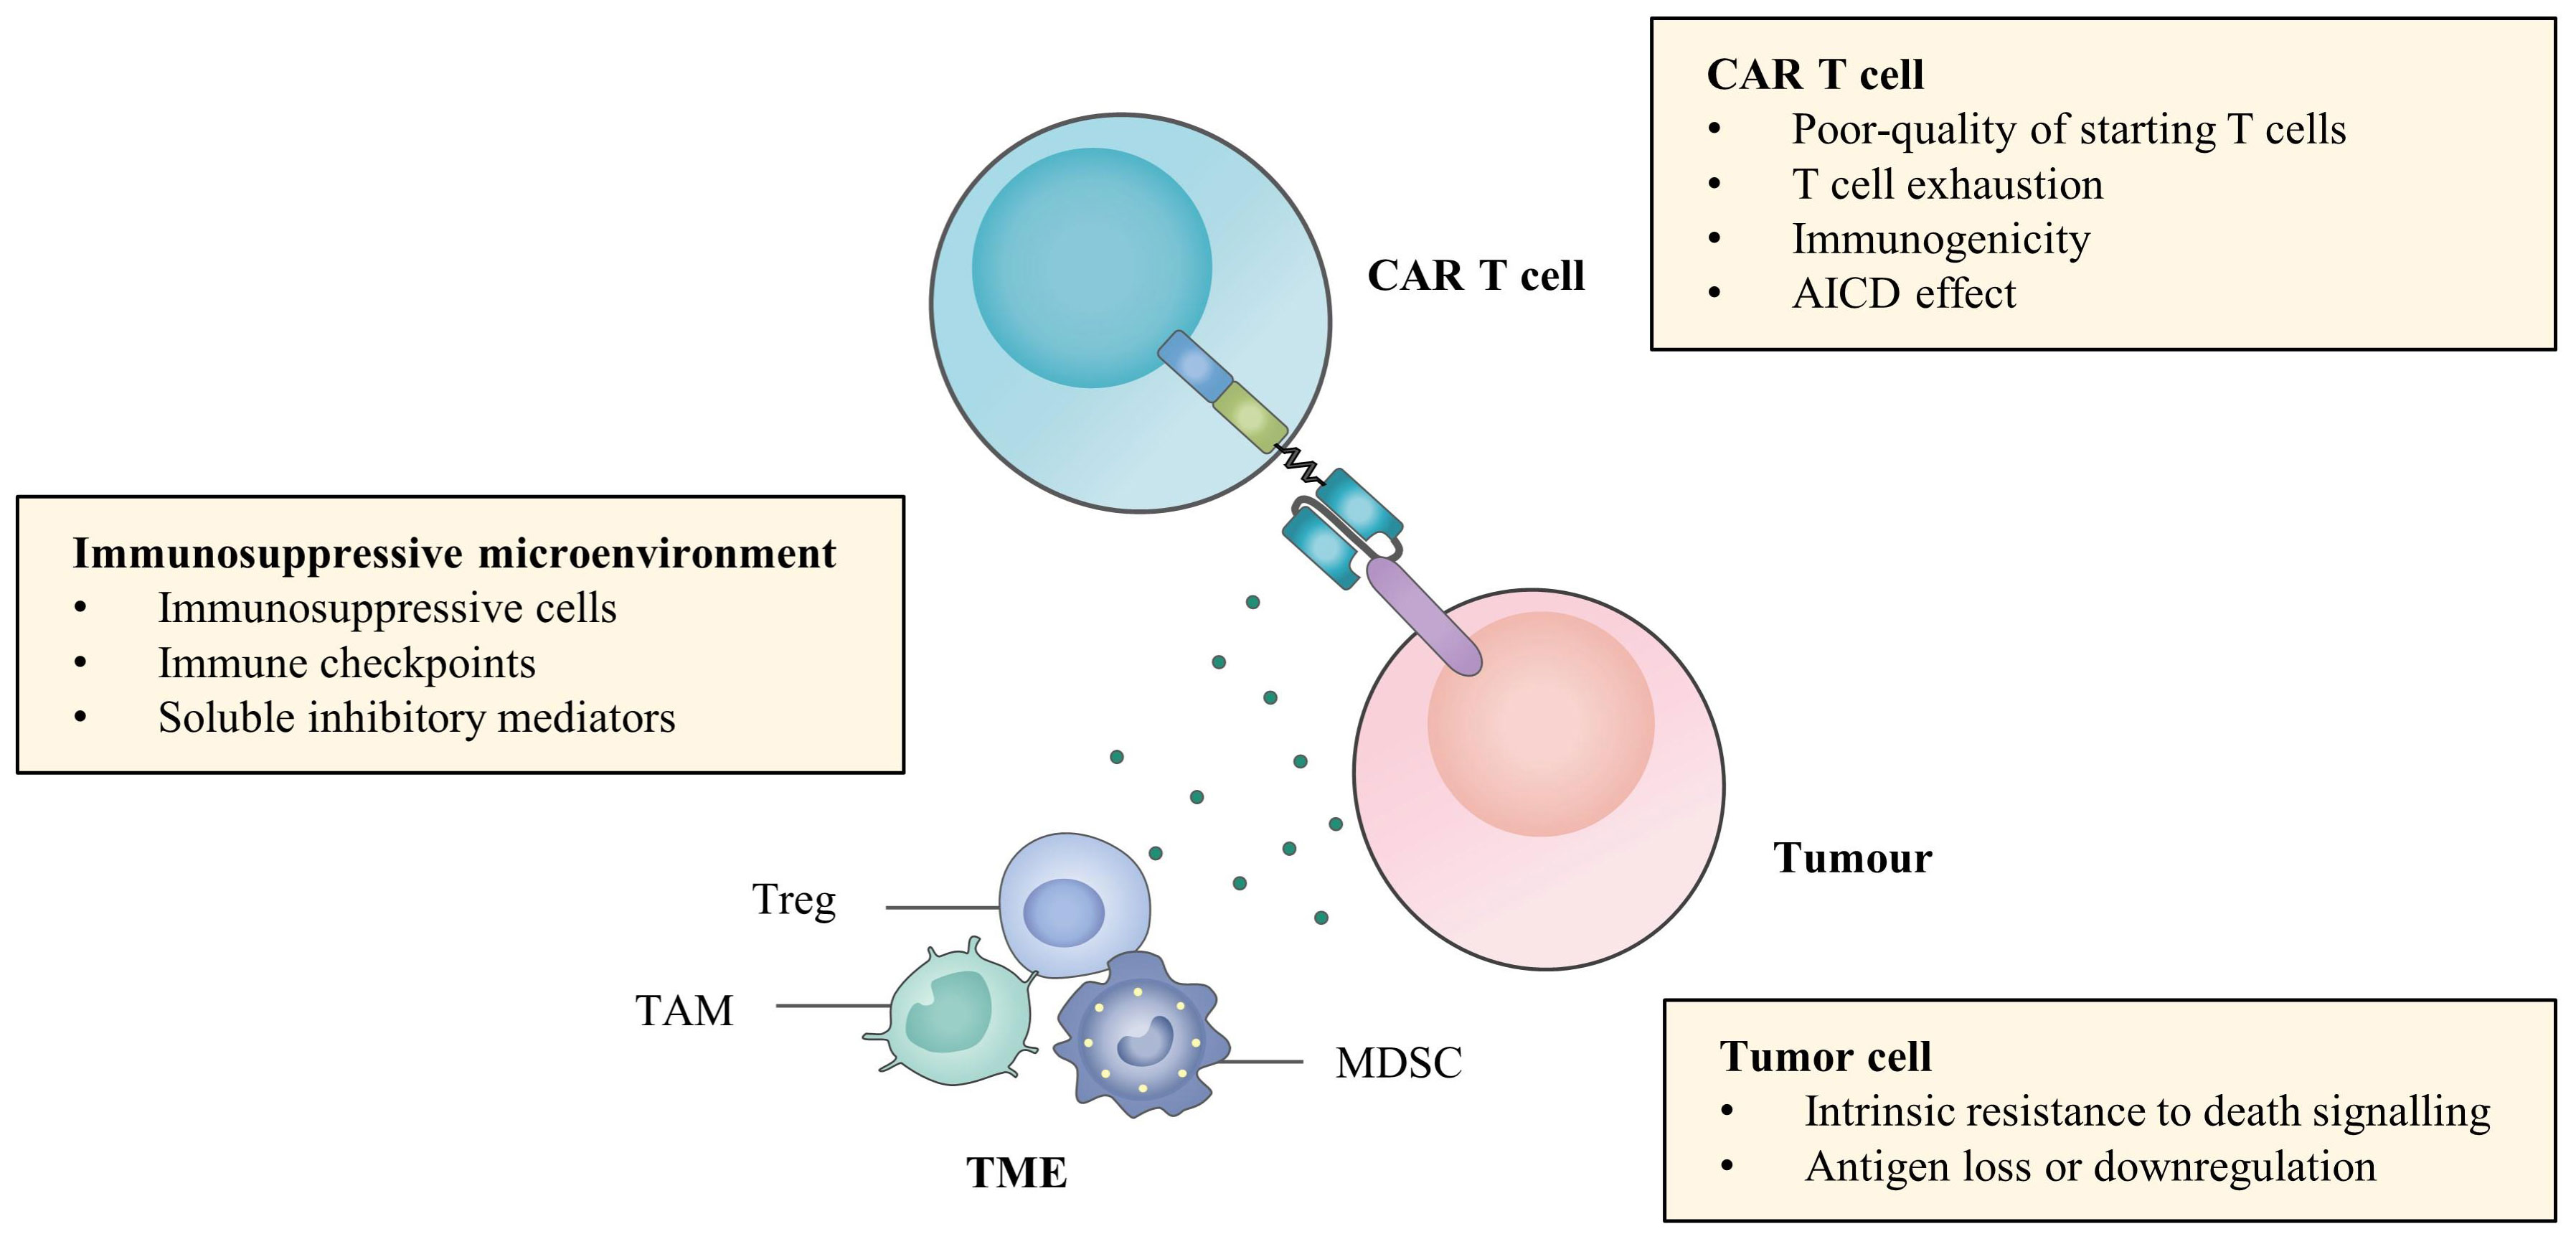 Transient rest restores functionality in exhausted CAR-T cells through  epigenetic remodeling